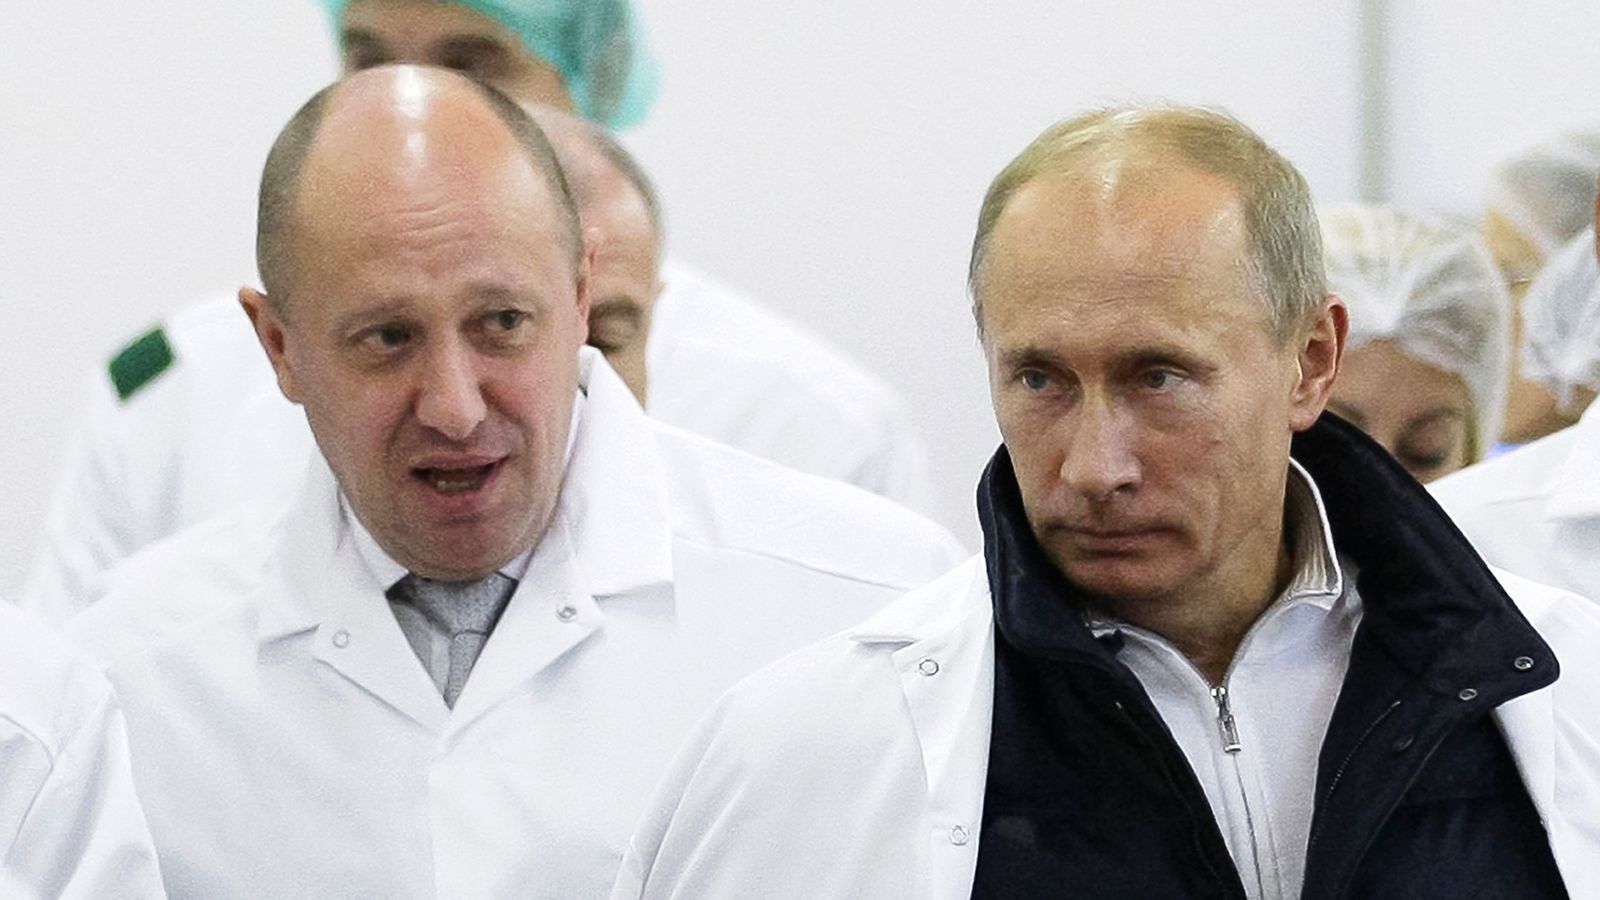 Vladimir Putin raised Prigozhin up, used him and it seems he has now destroyed his own creature